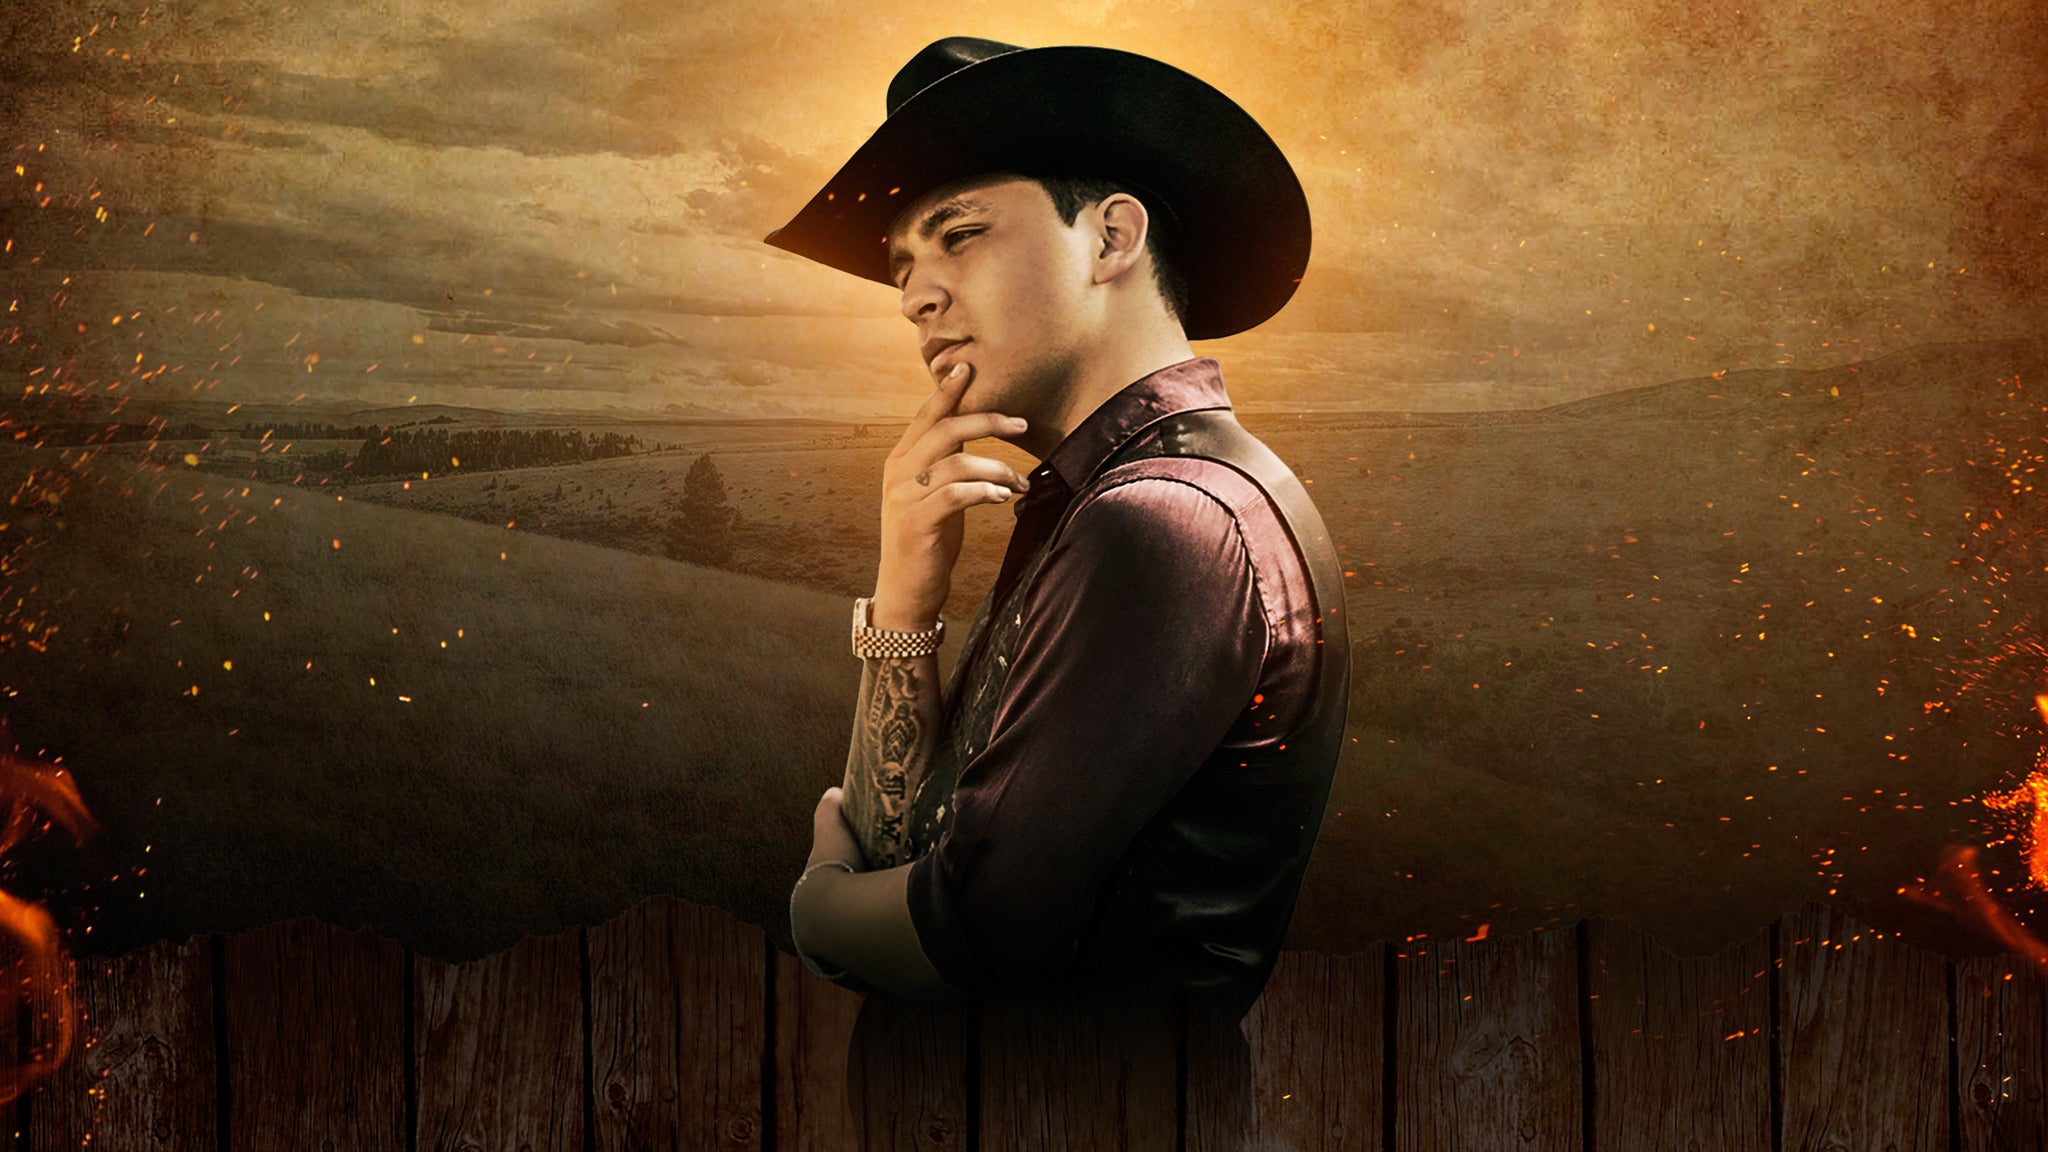 Christian Nodal - Ahora - SOLD OUT! in Hollywood promo photo for Dolby Theatre presale offer code